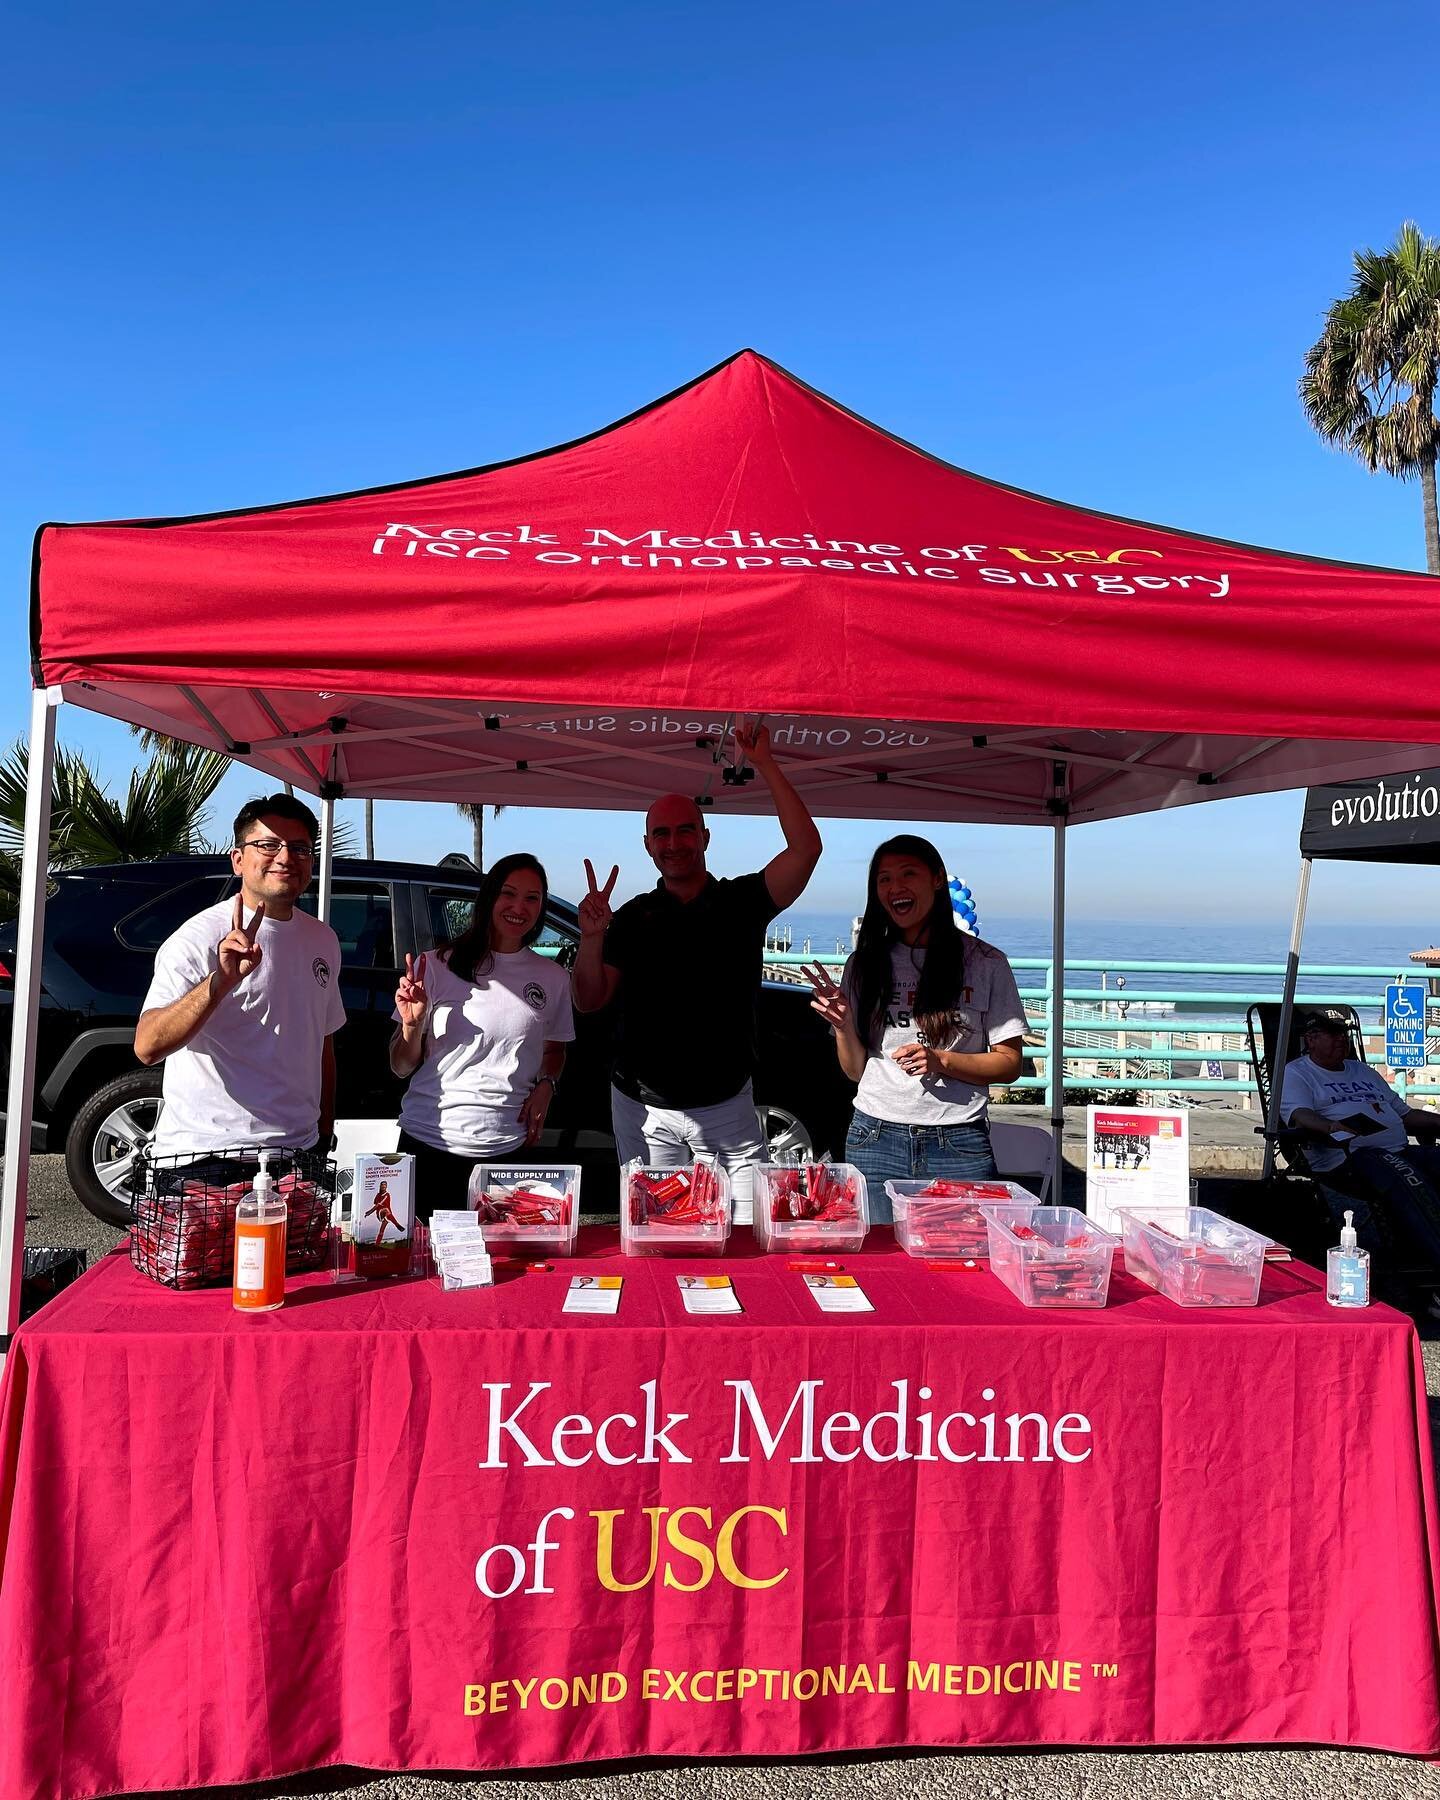 ✌🏼🏈Fight on this weekend! We are thrilled to have @uscsportsmedicine back at our post-race expo on October 1st! They will be paired right next to @evolutionptfit offering physical therapy assessments!

#mb10k
#October1
#fighton✌️ 
#keckmedicineofus